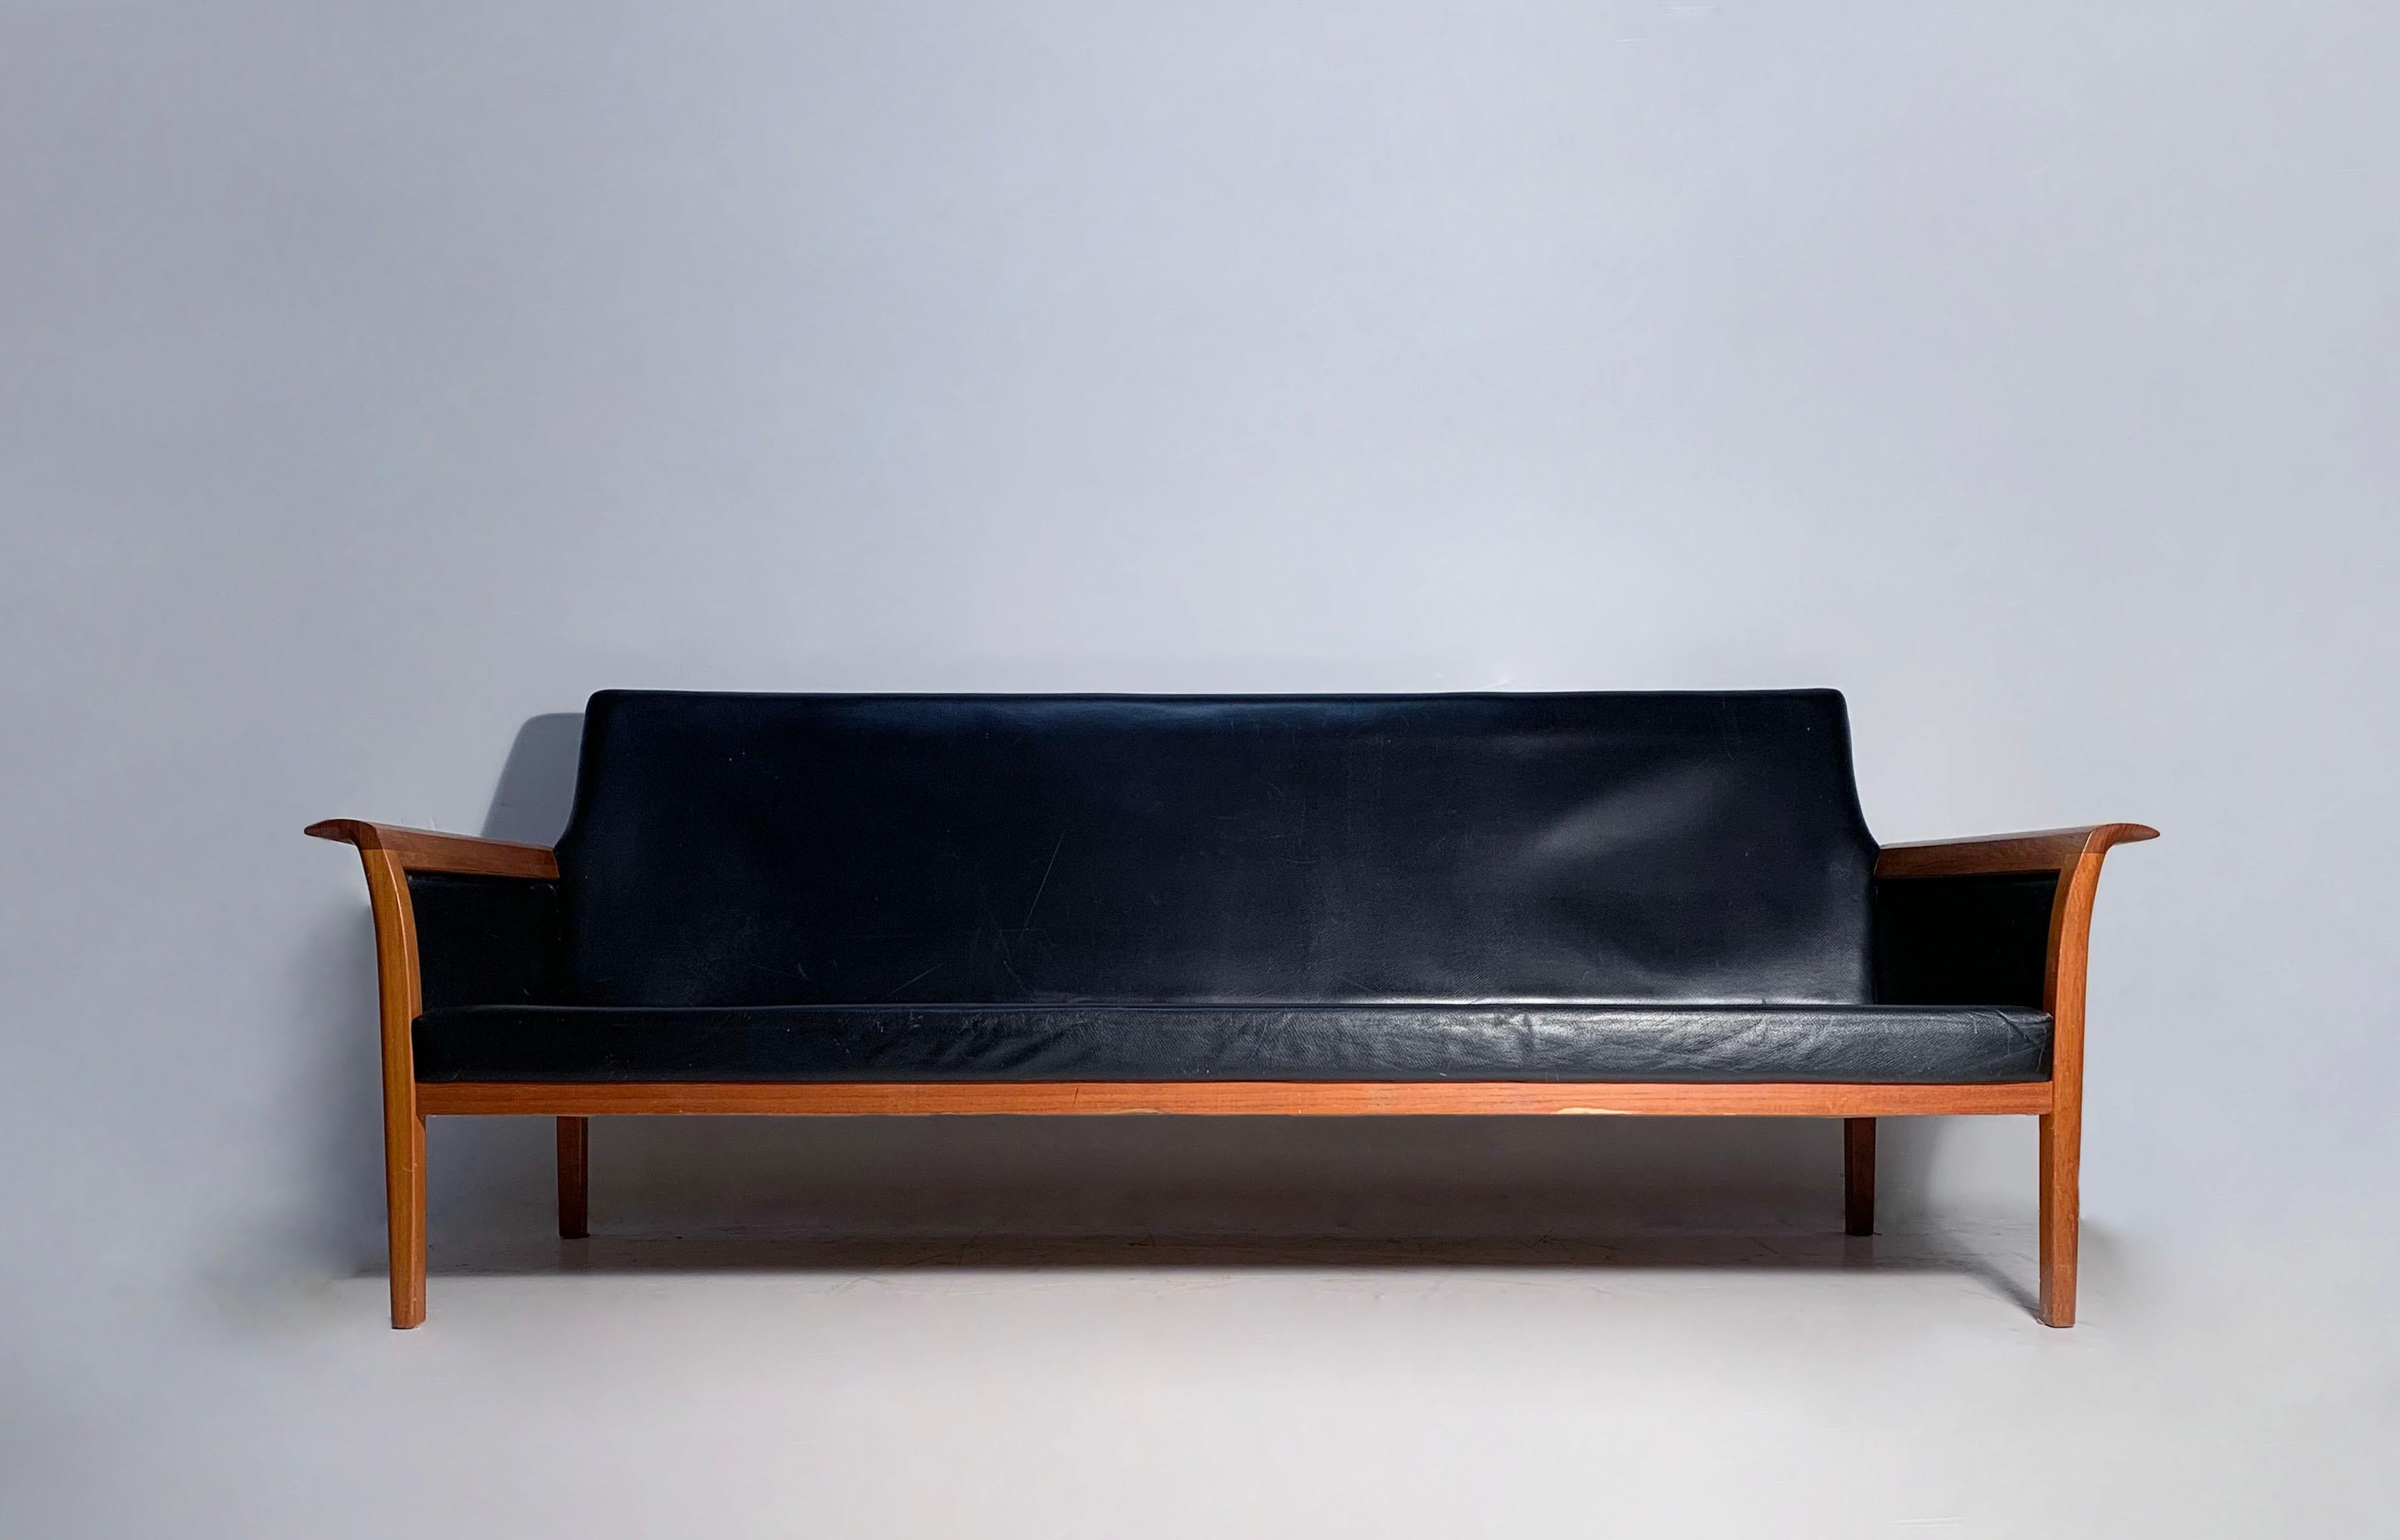 Vintage Vatne Mobler Teak Sofa by Knut Saeter for Vatne Mobler

Beautiful Lines on this teak sofa. Just requires new upholstery as the pillows are no longer accompanying the sofa. Probably best to replace the black vinyl as well in the process to